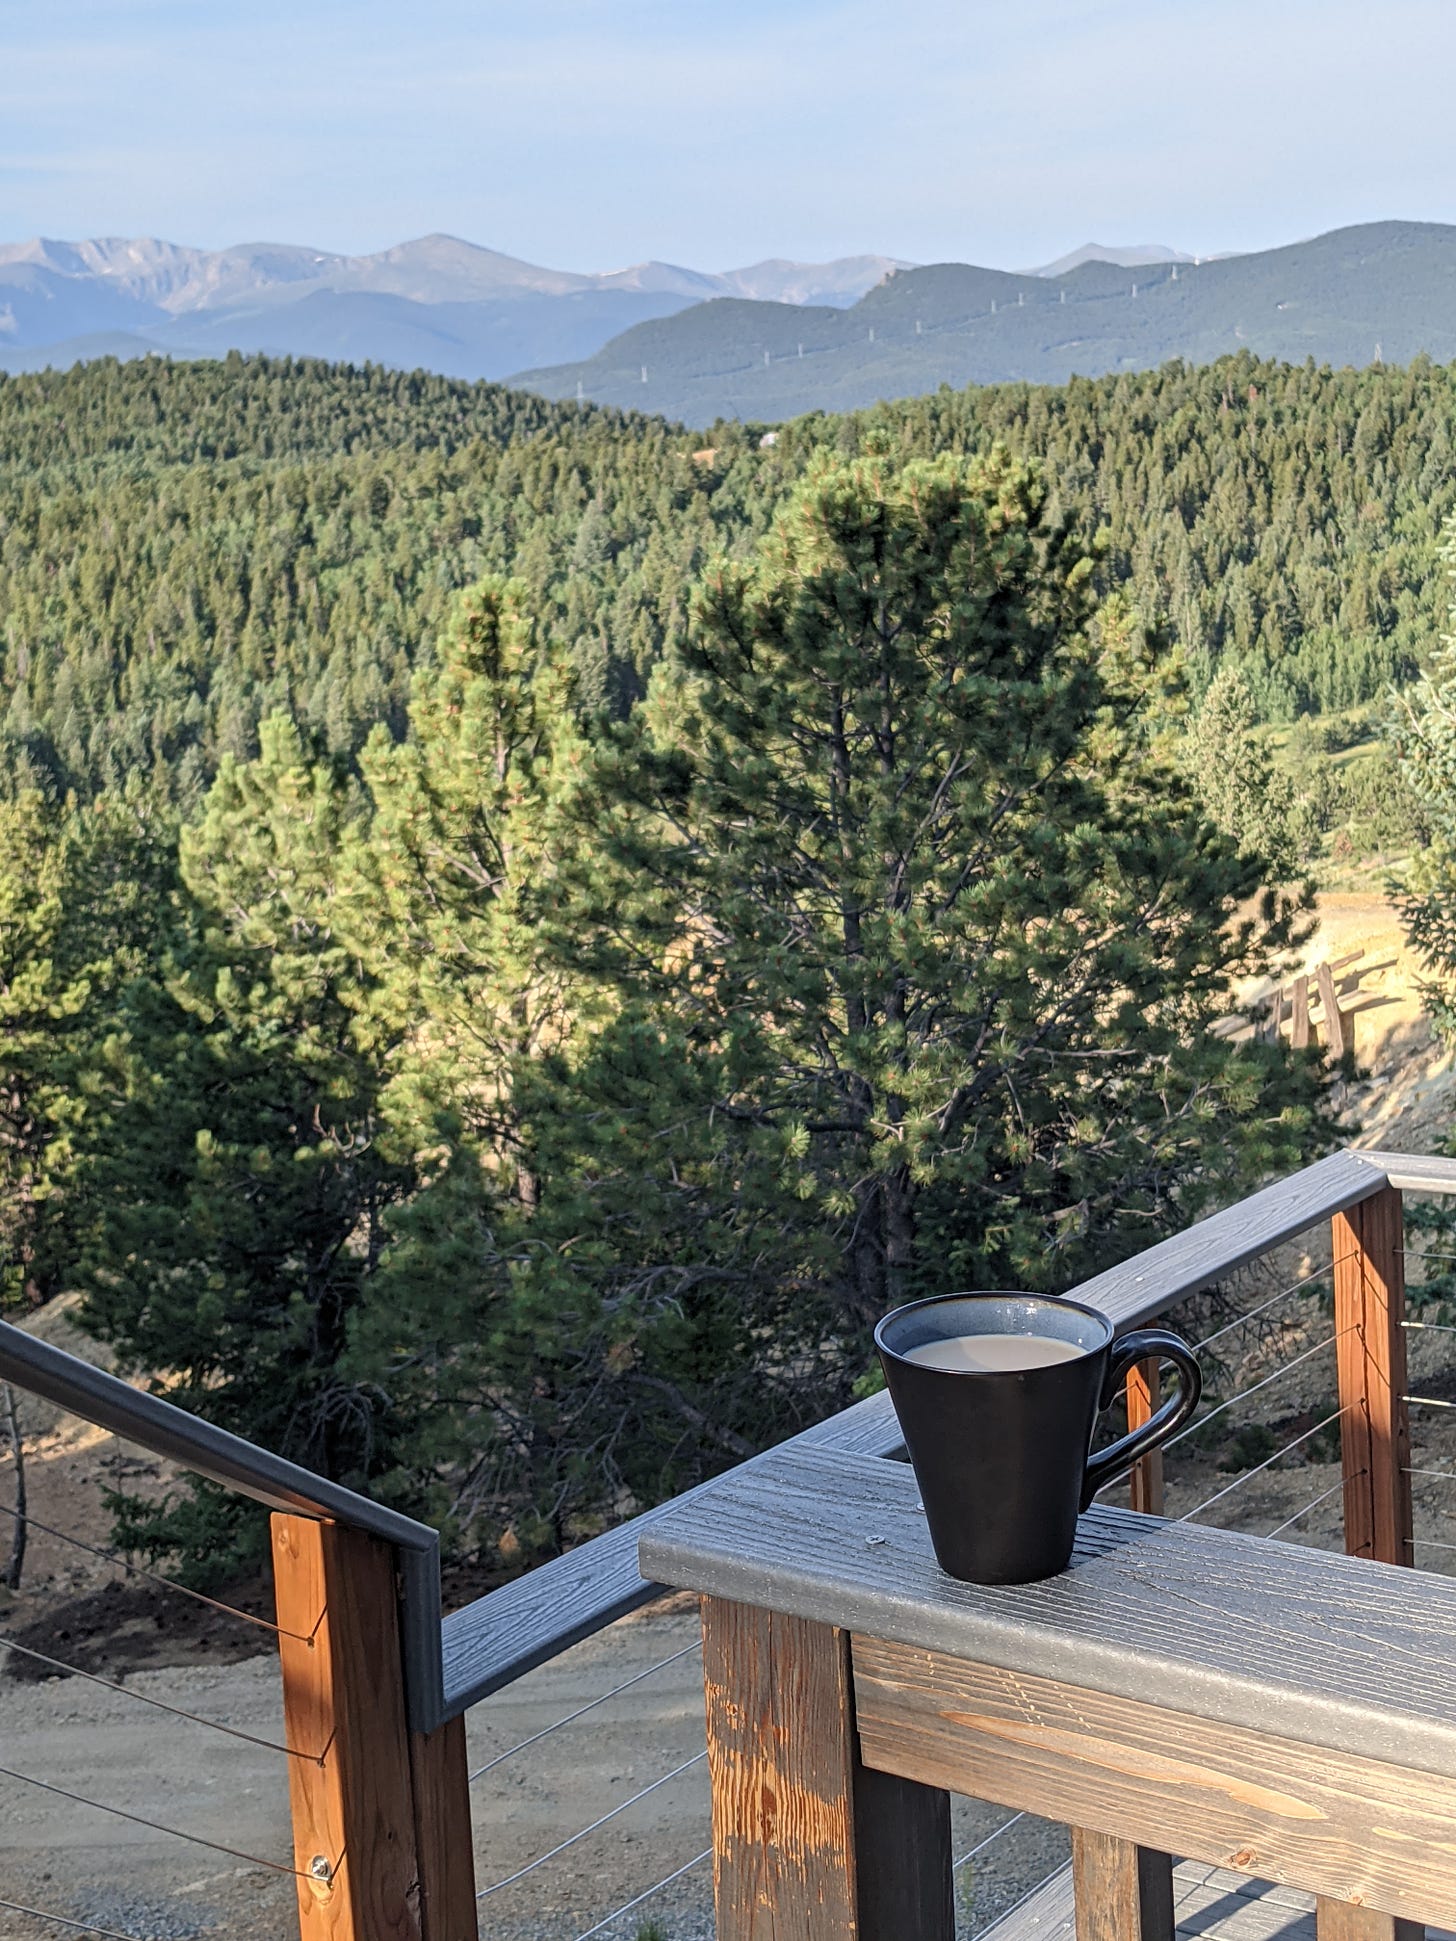 A black coffee mug full of milky coffee sits on a blond wooden porch railing. A wooden deck with fencing continues down stairs, before a view of green pine trees and in the near background, rows of brown and blue mountains below a pale blue, morning sky.